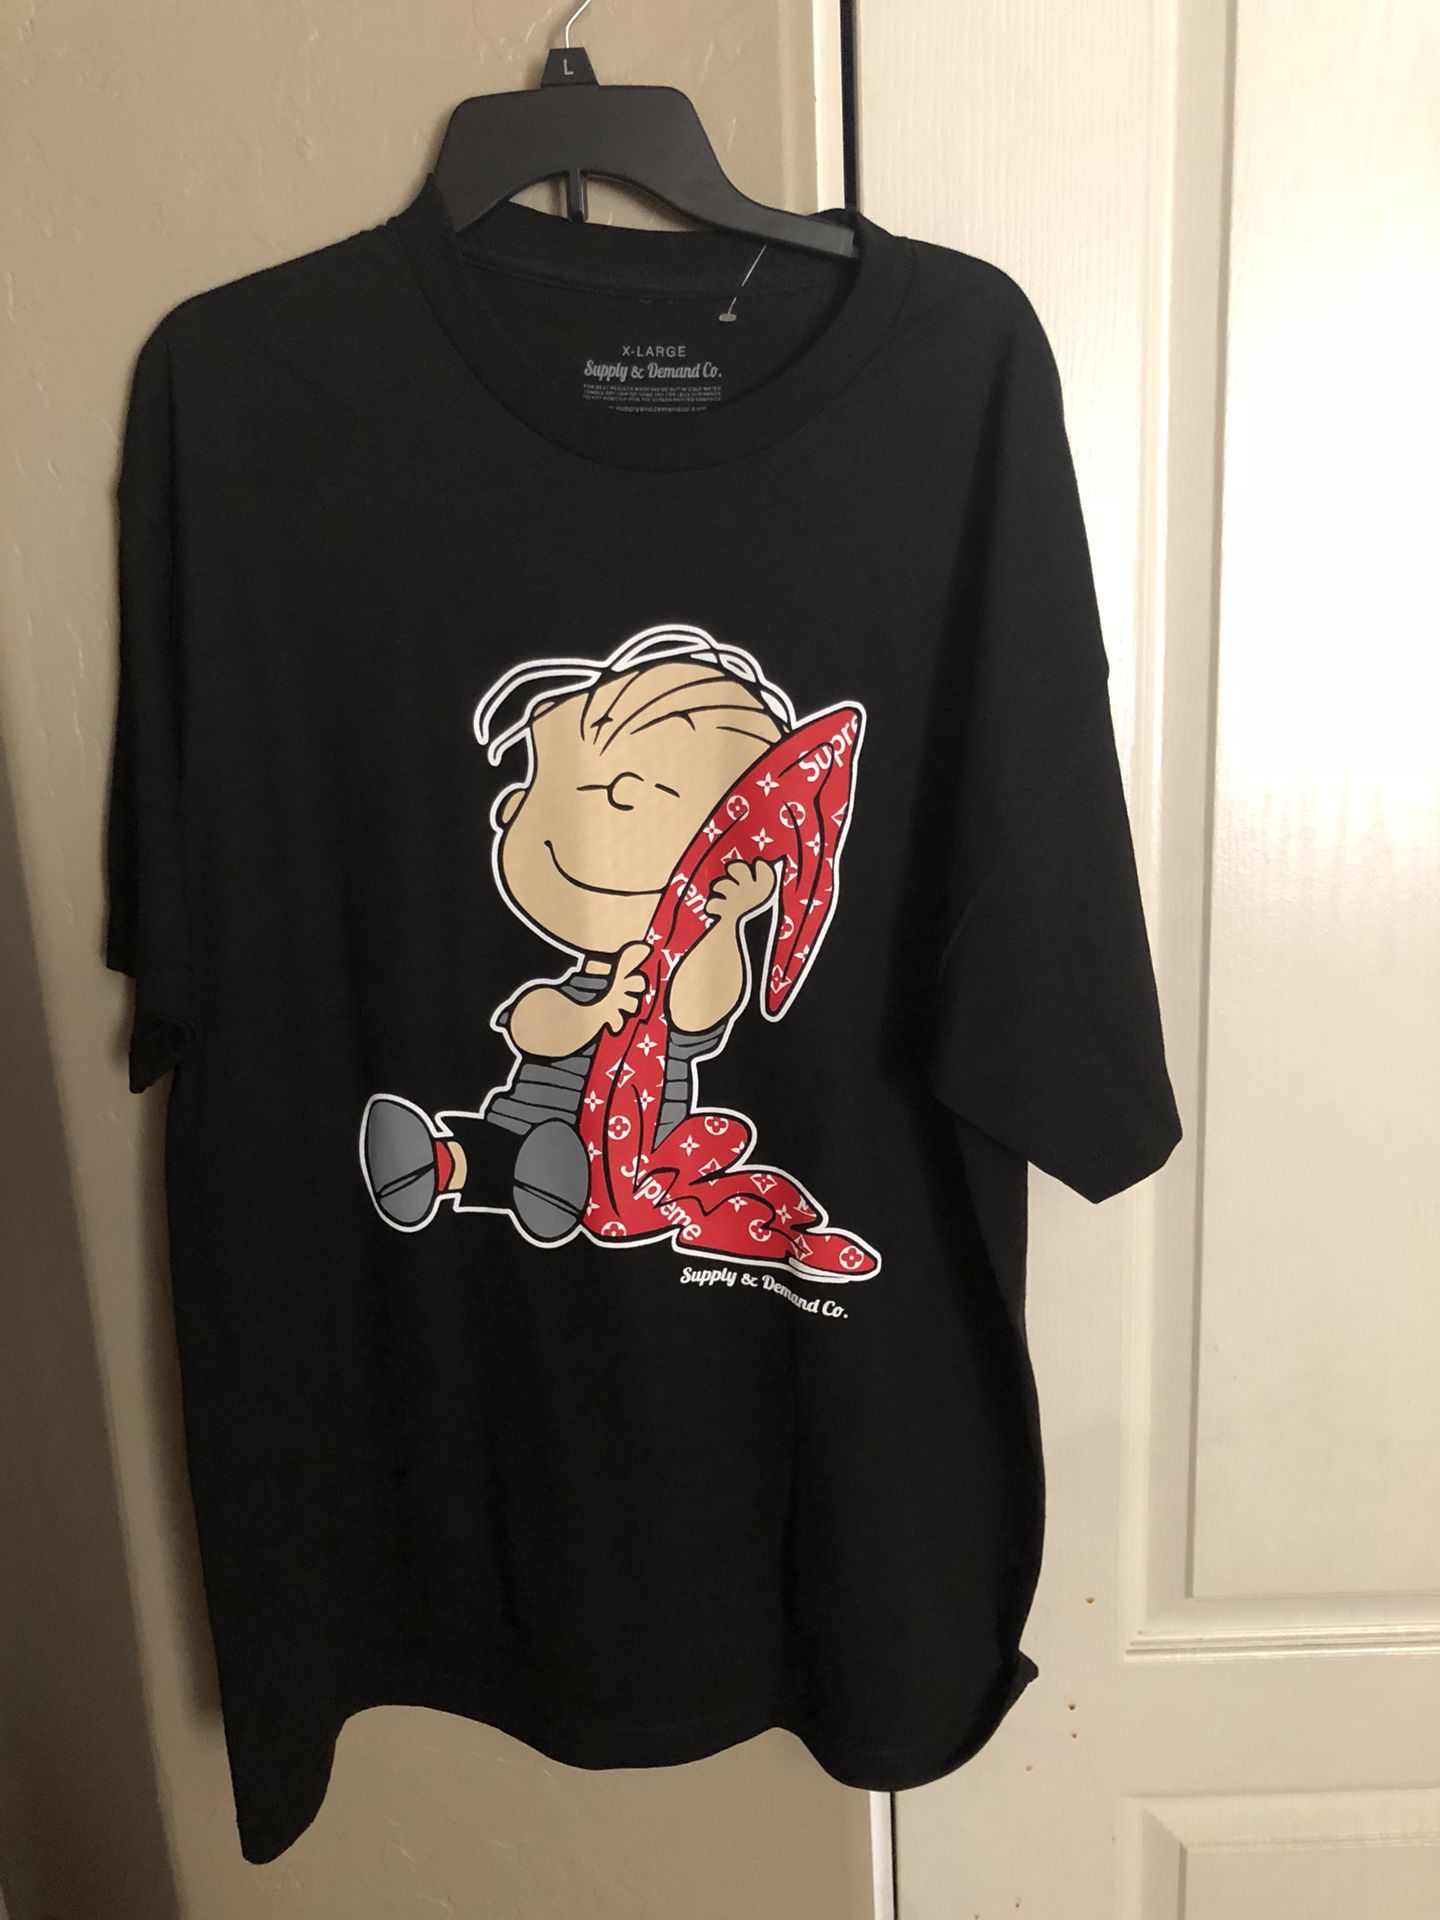 Gorgeous Official Snoopy Louis Vuitton Chanel Gucci Shirt